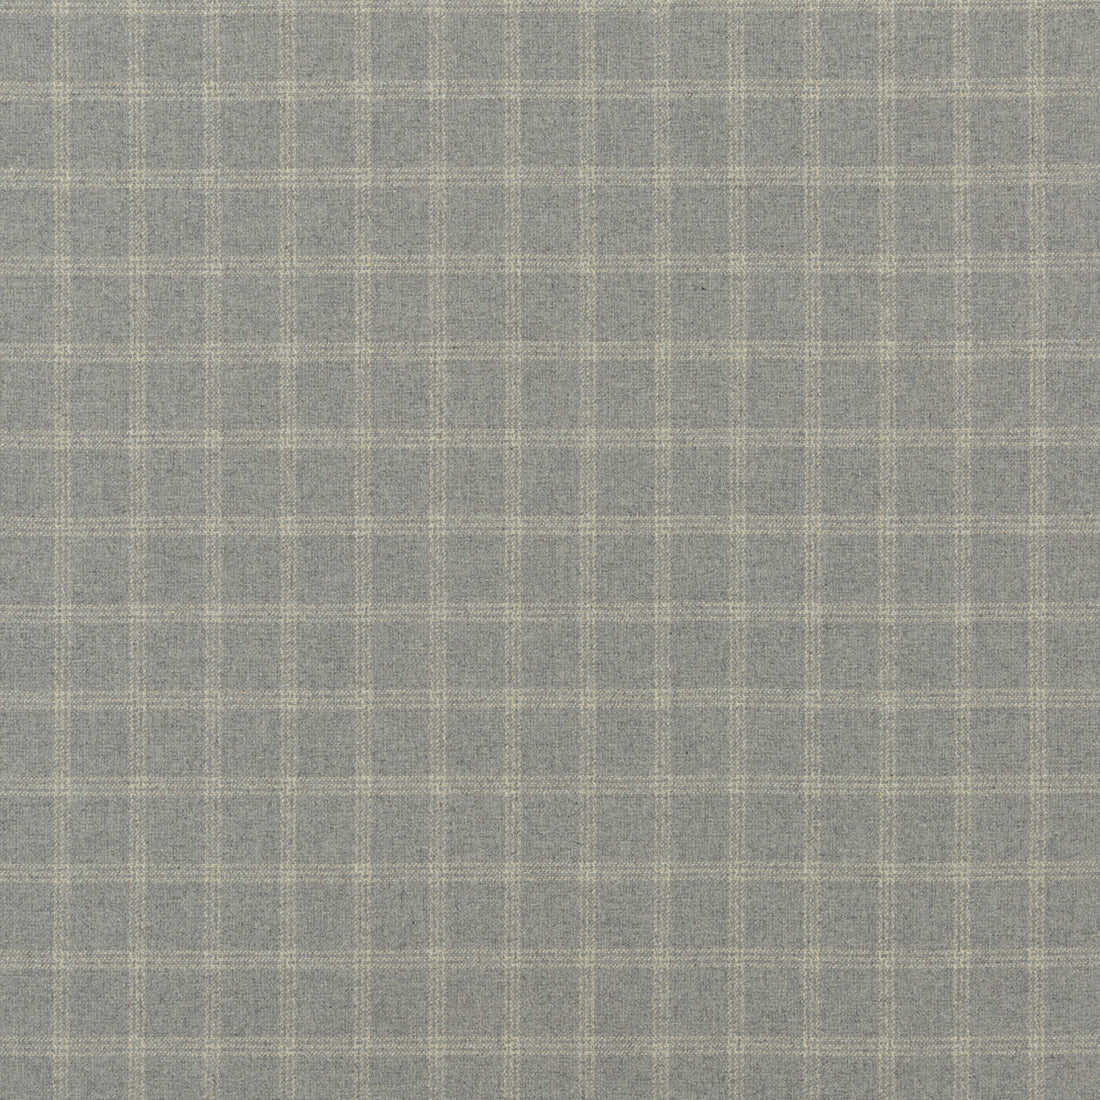 Bute fabric in grey color - pattern FD749.A121.0 - by Mulberry in the Festival collection